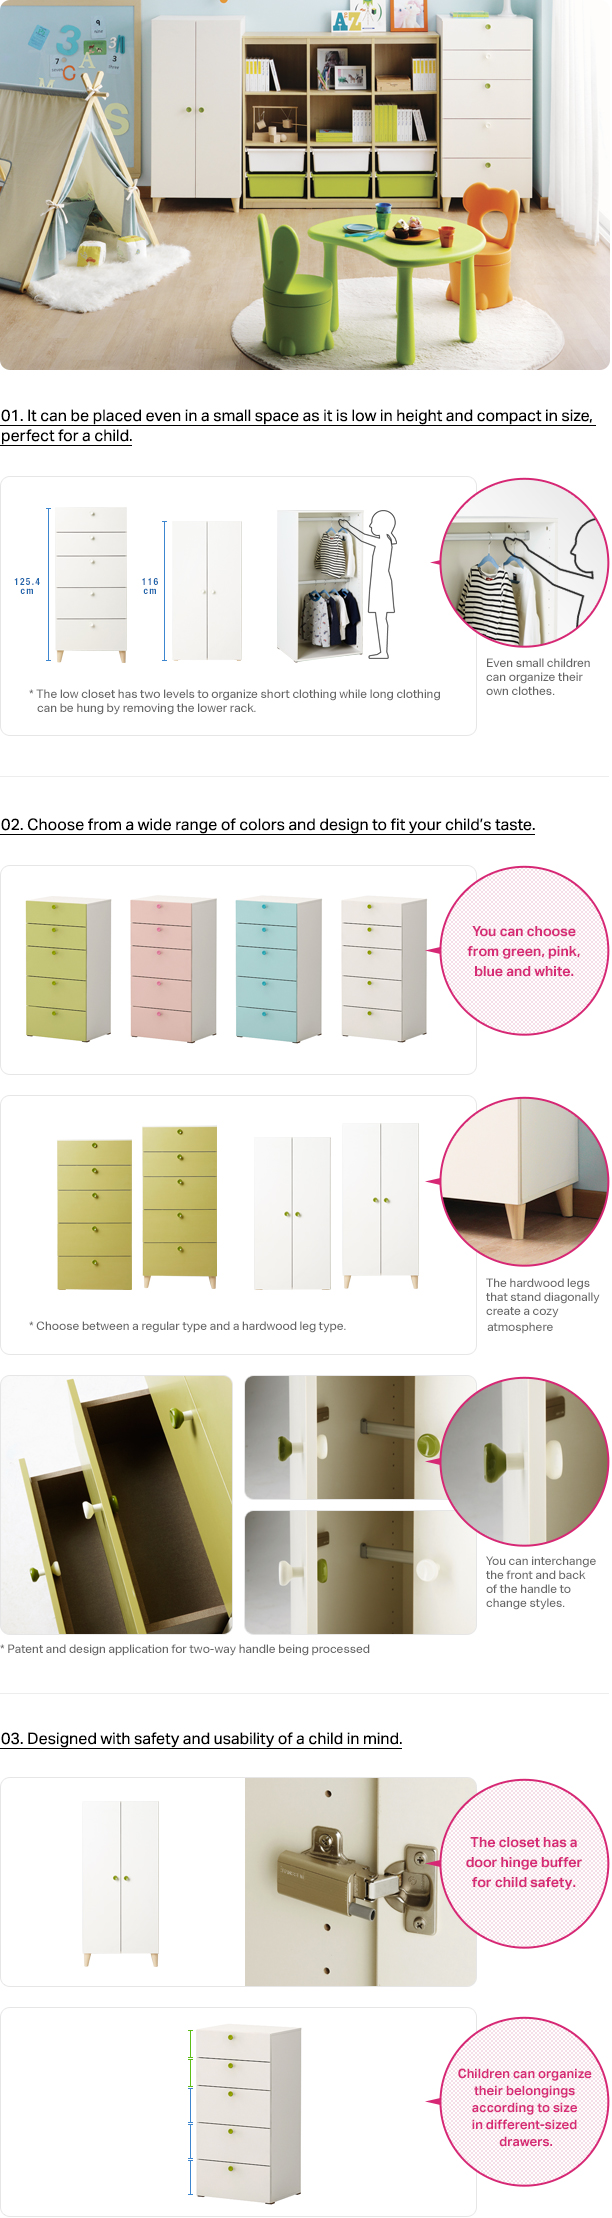 01. It can be placed even in a small space as it is low in height and compact in size, perfect for a child. Even small children can organize their own clothes. The low closet has two levels to organize short clothing while long clothing can be hung by removing the lower rack. Choose from a wide range of colors and design to fit your child’s taste. You can choose from green, pink, blue and white. Choose between a regular type and a hardwood leg type. The hardwood legs that stand diagonally create a cozy atmosphere.You can interchange the front and back of the handle to change styles. Designed with safety and usability of a child in mind. The closet has a door hinge buffer for child safety.Children can organize their belongings according to size in different-sized drawers.